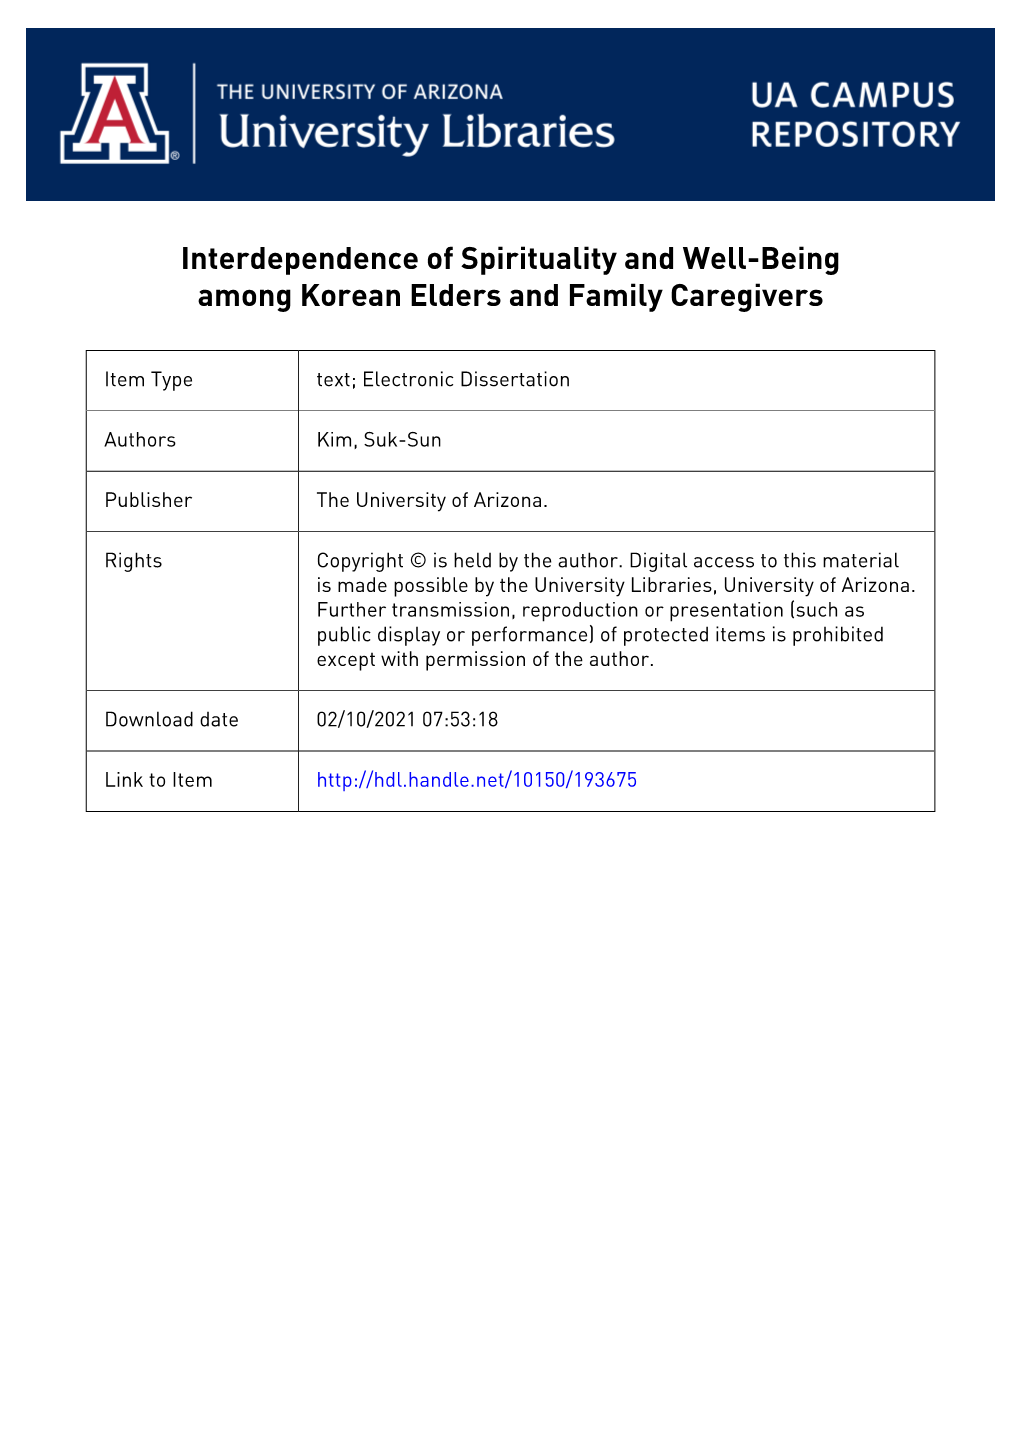 Interdependence of Spirituality and Well-Being Among Korean Elders and Family Caregivers